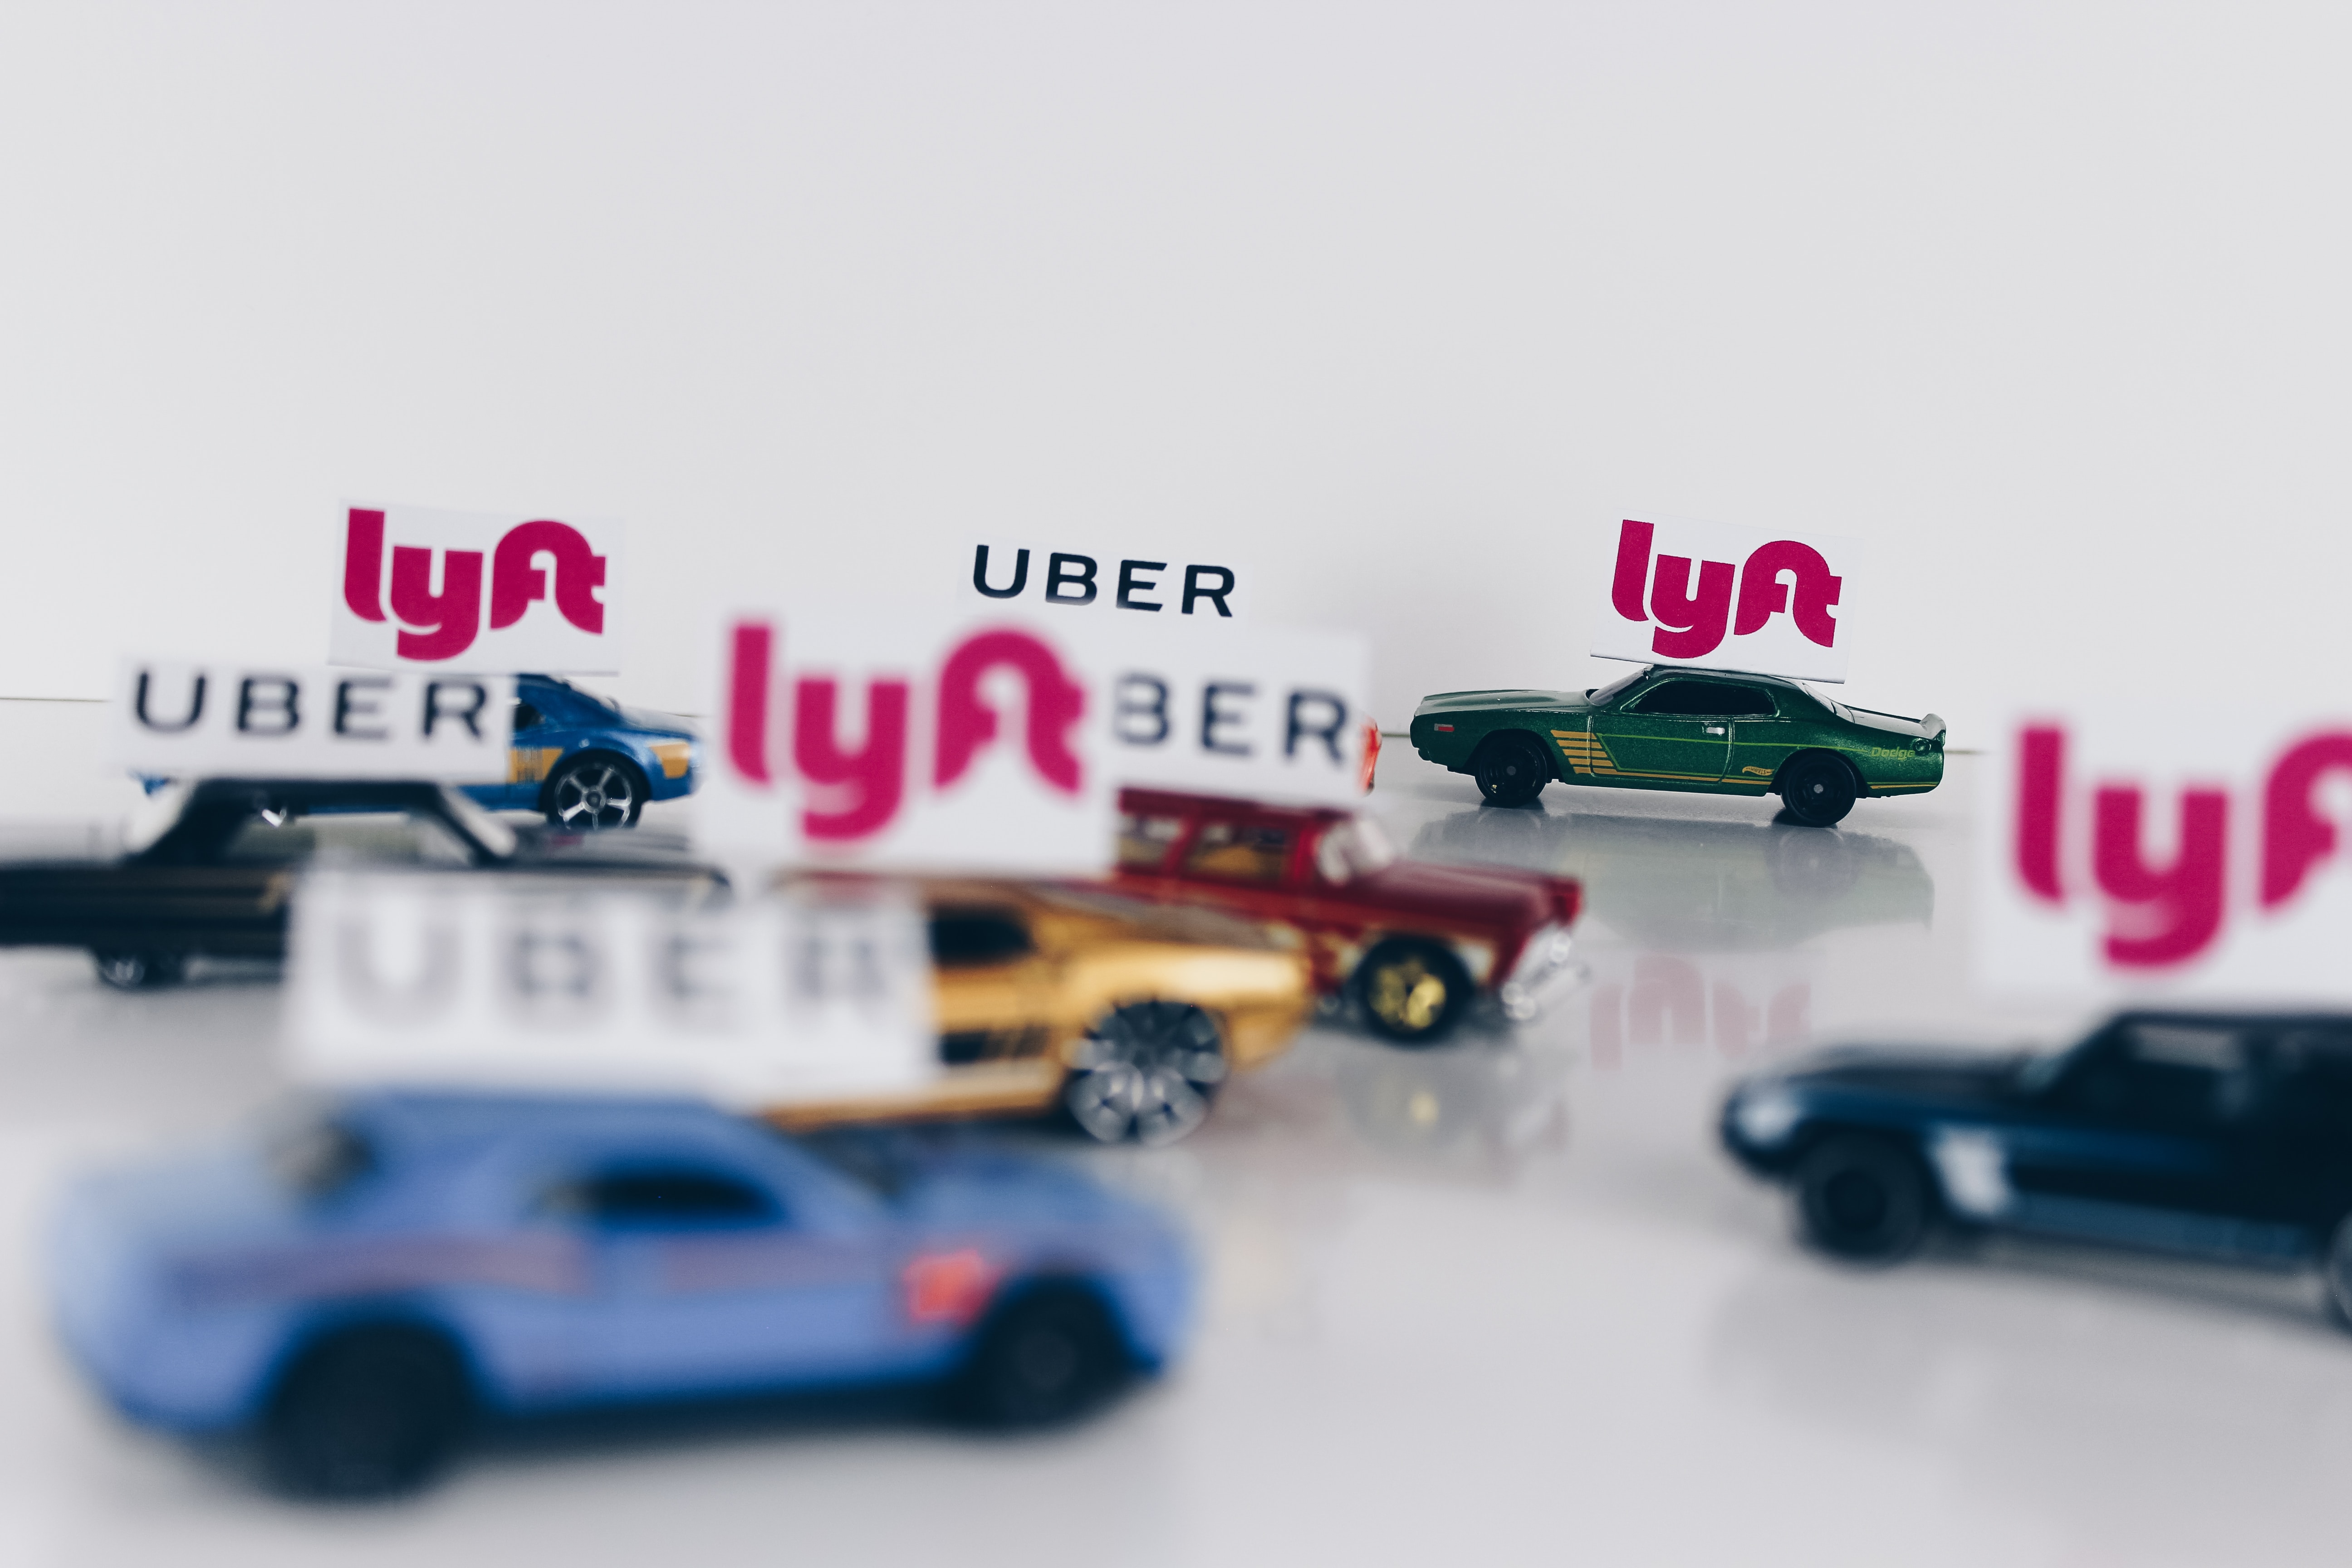 Uber and Lyft are U.S. based ride sharing companies. Photo by Thought Catalog on Unsplash